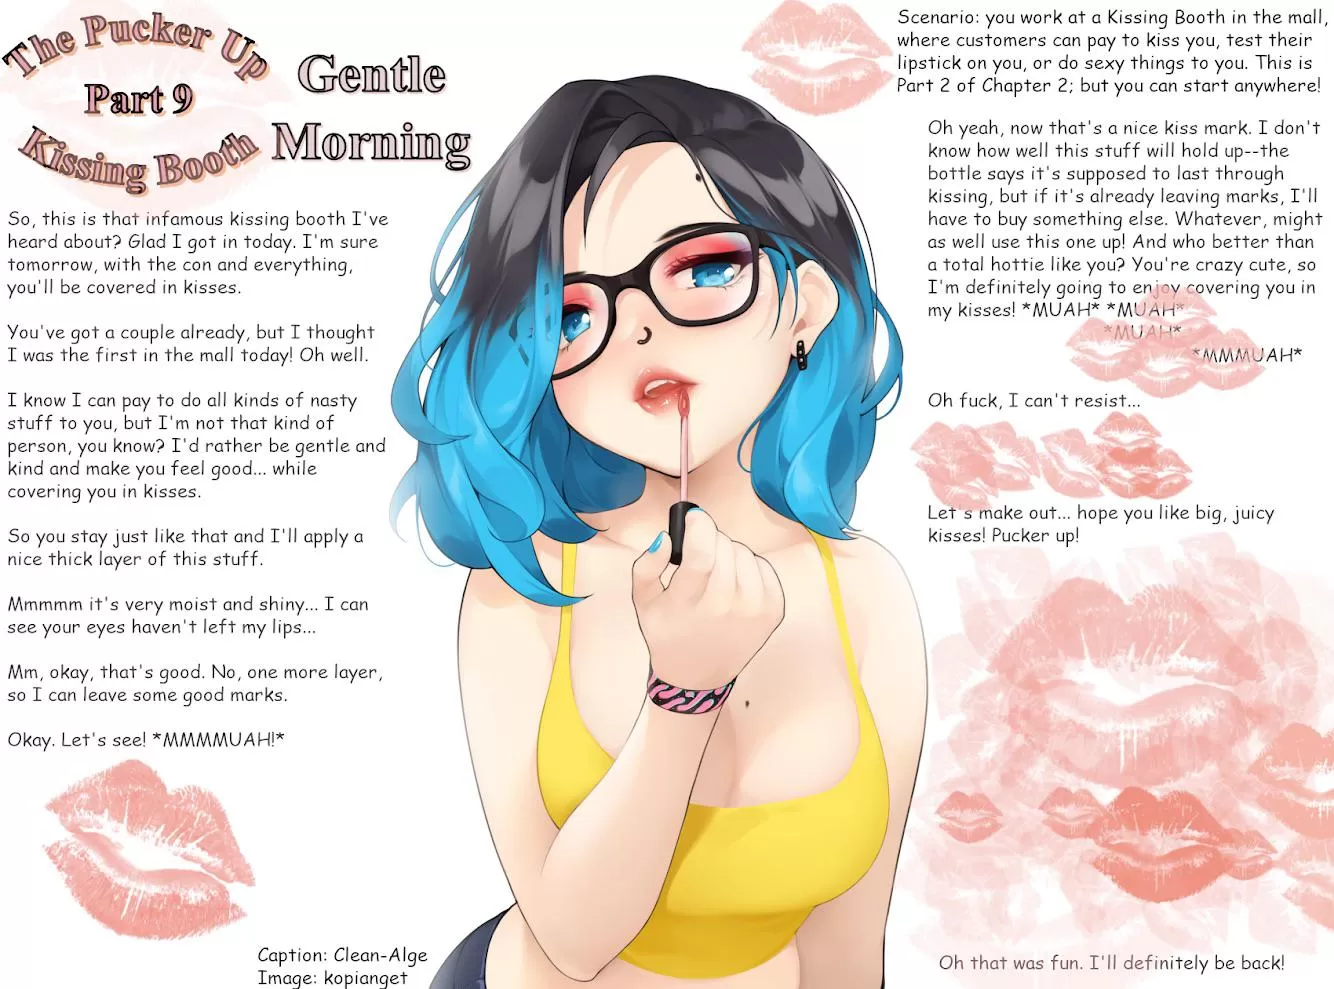 The Kissing Booth, Part 9: A Gentle Morning [kissing] [lipstick] nudes :  hentaicaptions | NUDE-PICS.ORG